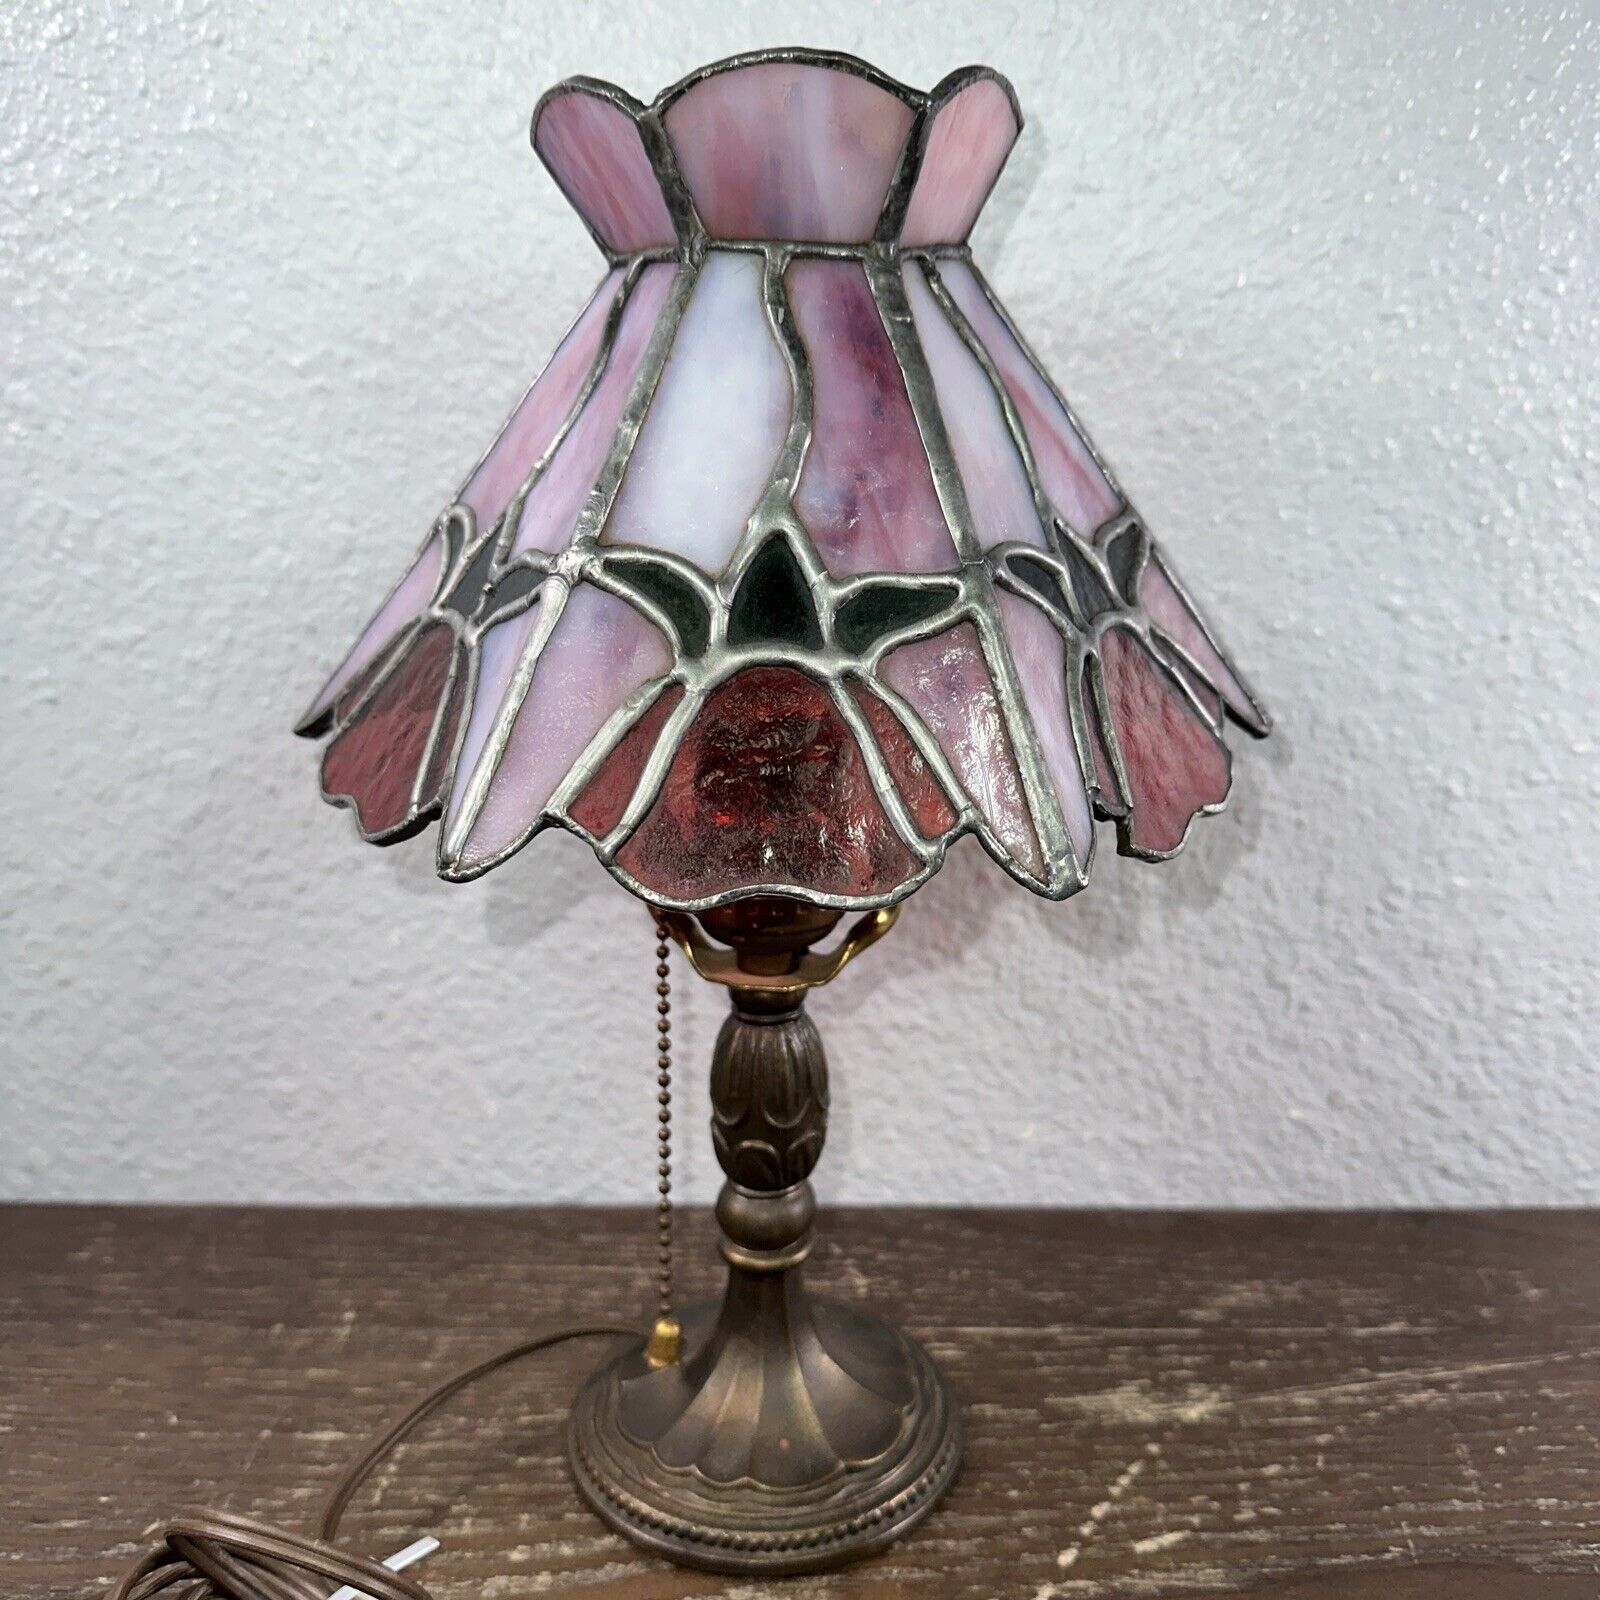 RARE Tiffany Style Stained Glass Lamp With Tulip Floral Pattern And Metal Base